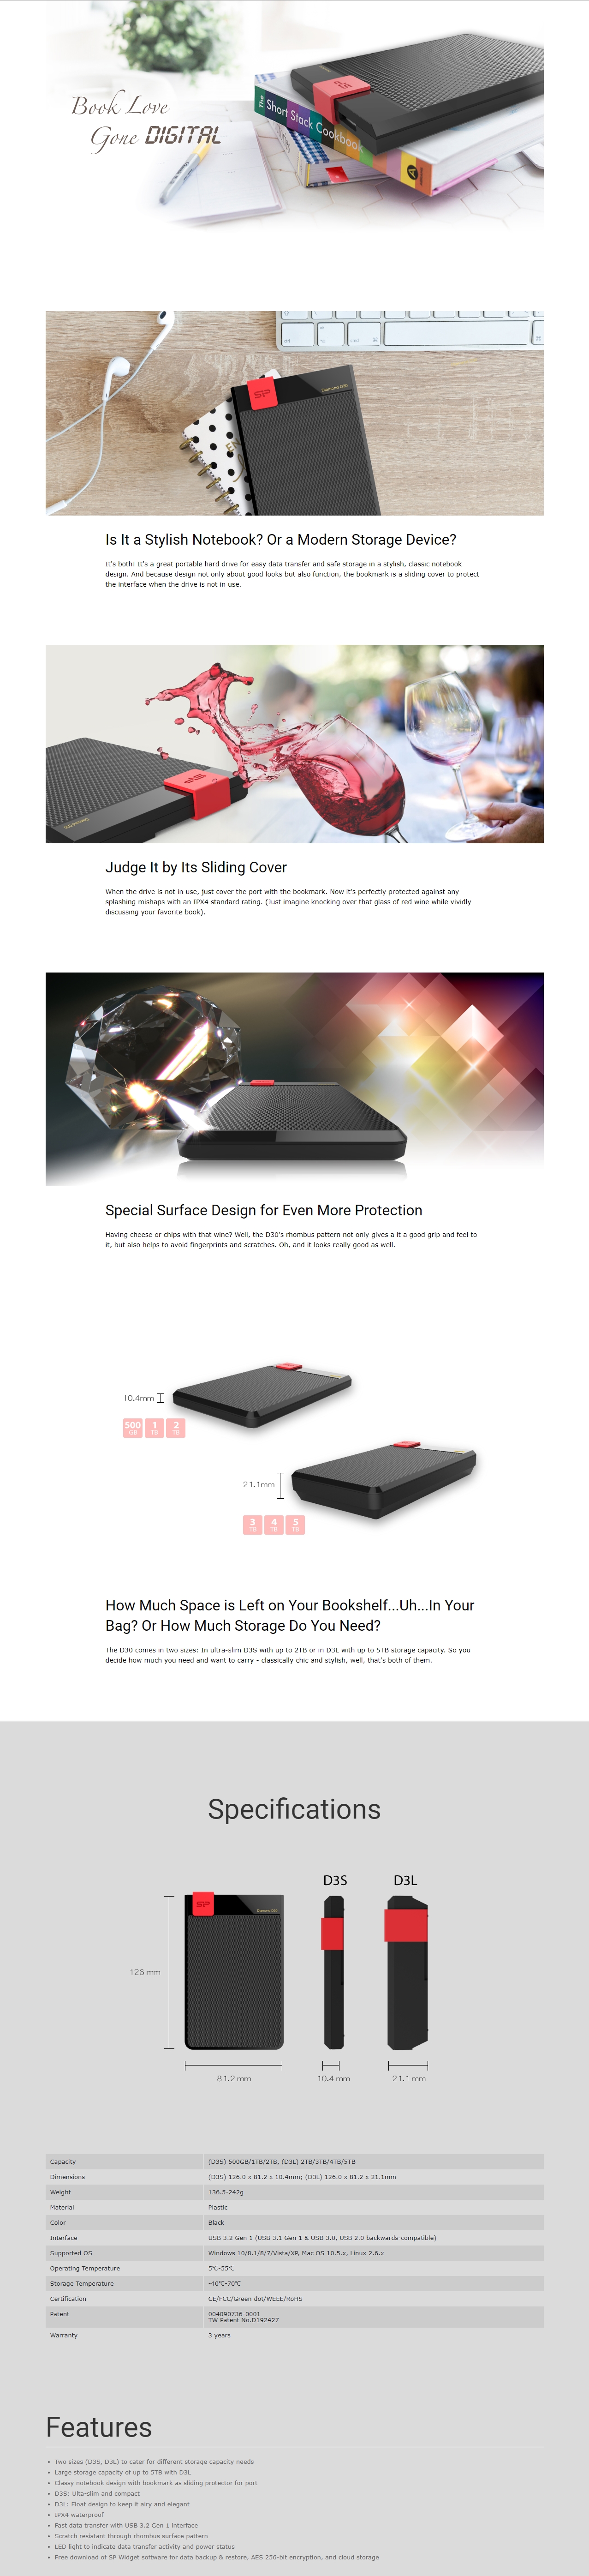 A large marketing image providing additional information about the product Silicon Power D30 5TB USB3.1 Water-Resistant External Hard Drive - Additional alt info not provided